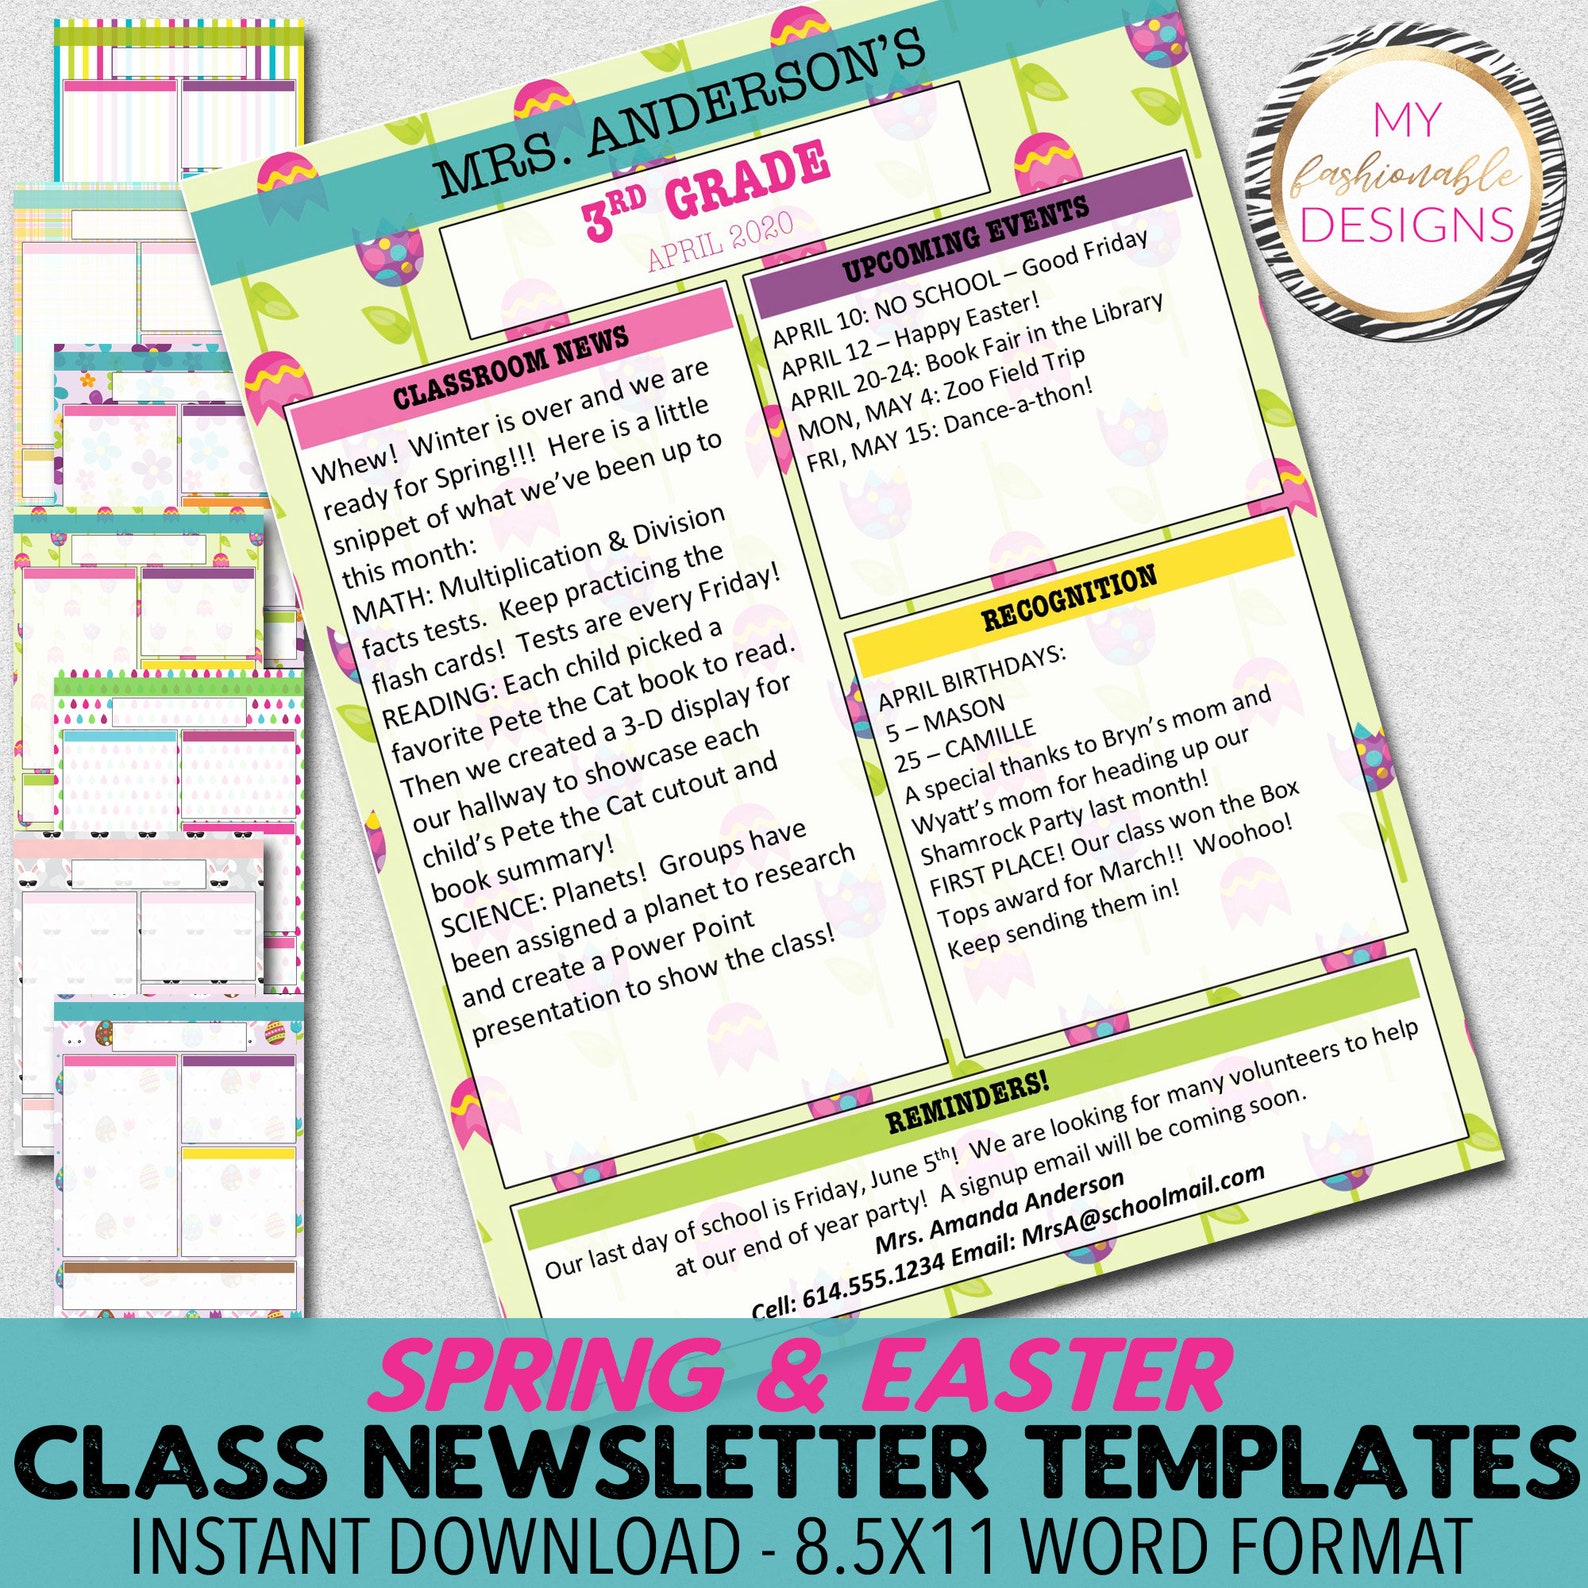 spring-newsletter-templates-7-designs-included-word-format-etsy